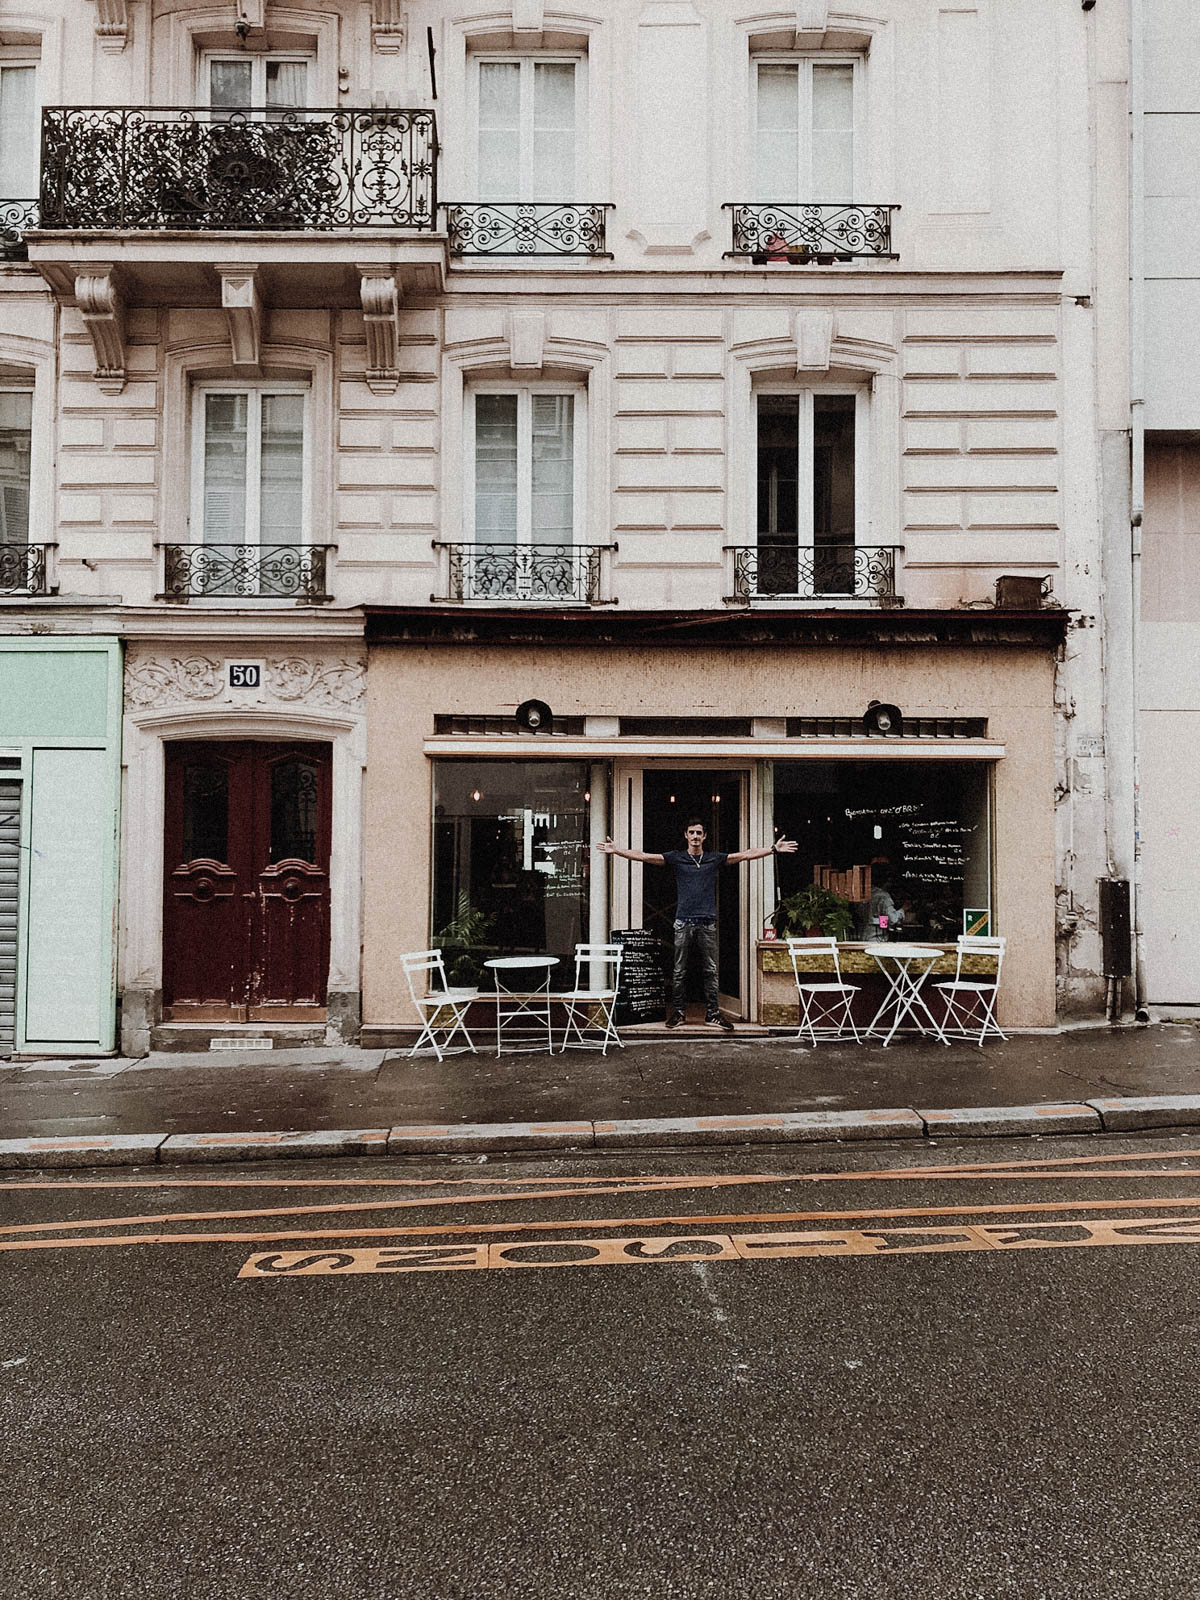 Paris France Travel Guide - French Cafe / RG Daily Blog